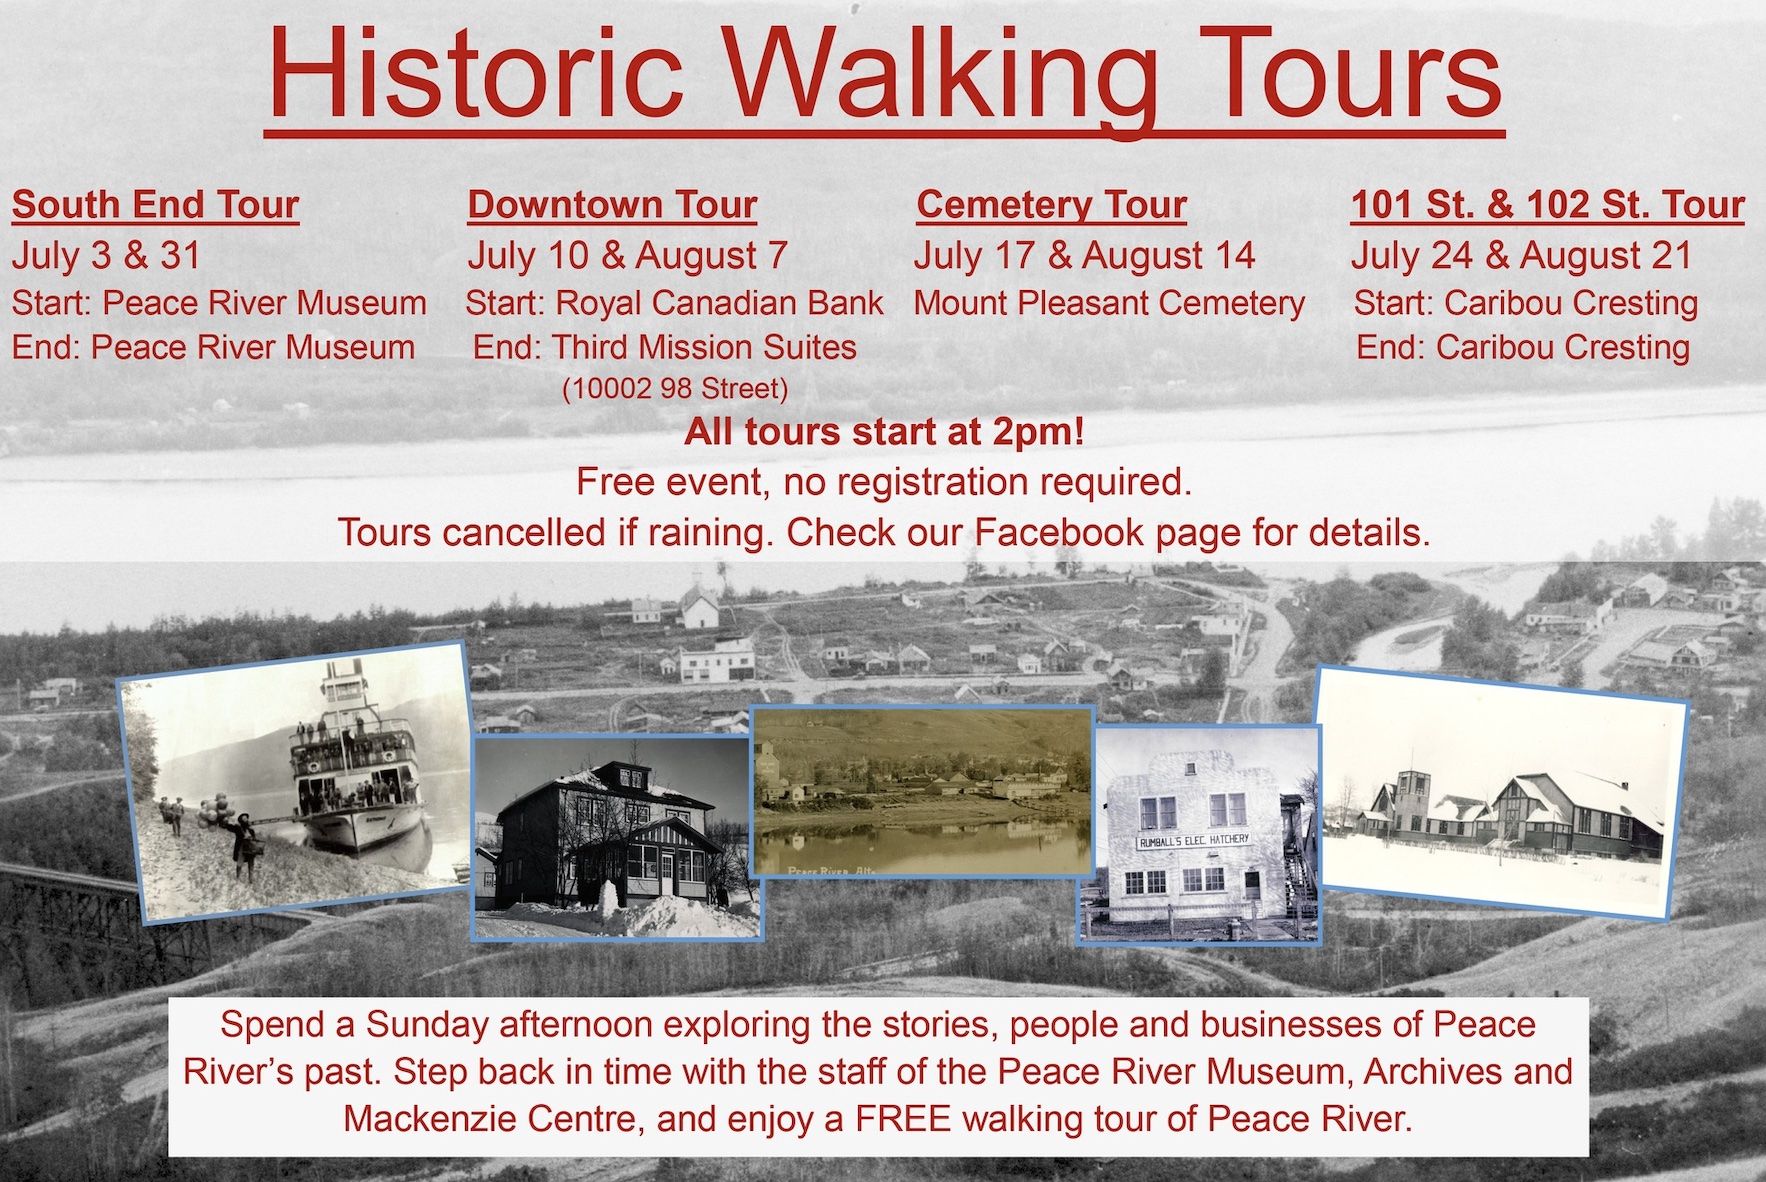 Historic Walking Tours in Peace River for the summer Peace River